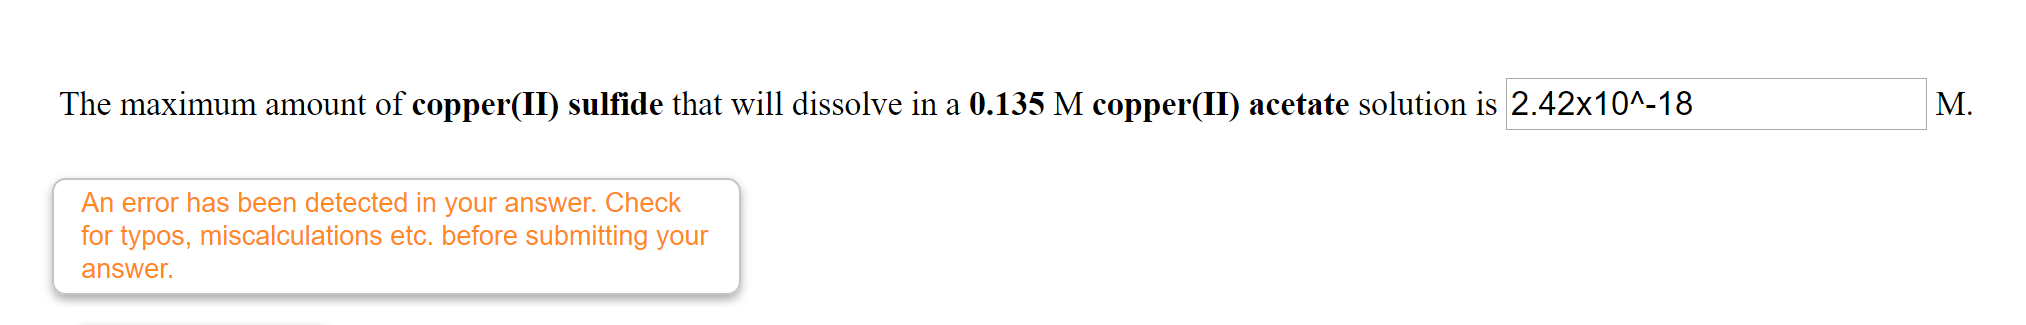 The maximum amount of copper(II) sulfide that will dissolve in a 0.135 M copper(II) acetate solution is 2.42x10^-18
M.
An error has been detected in your answer. Check
for typos, miscalculations etc. before submitting your
answer.
